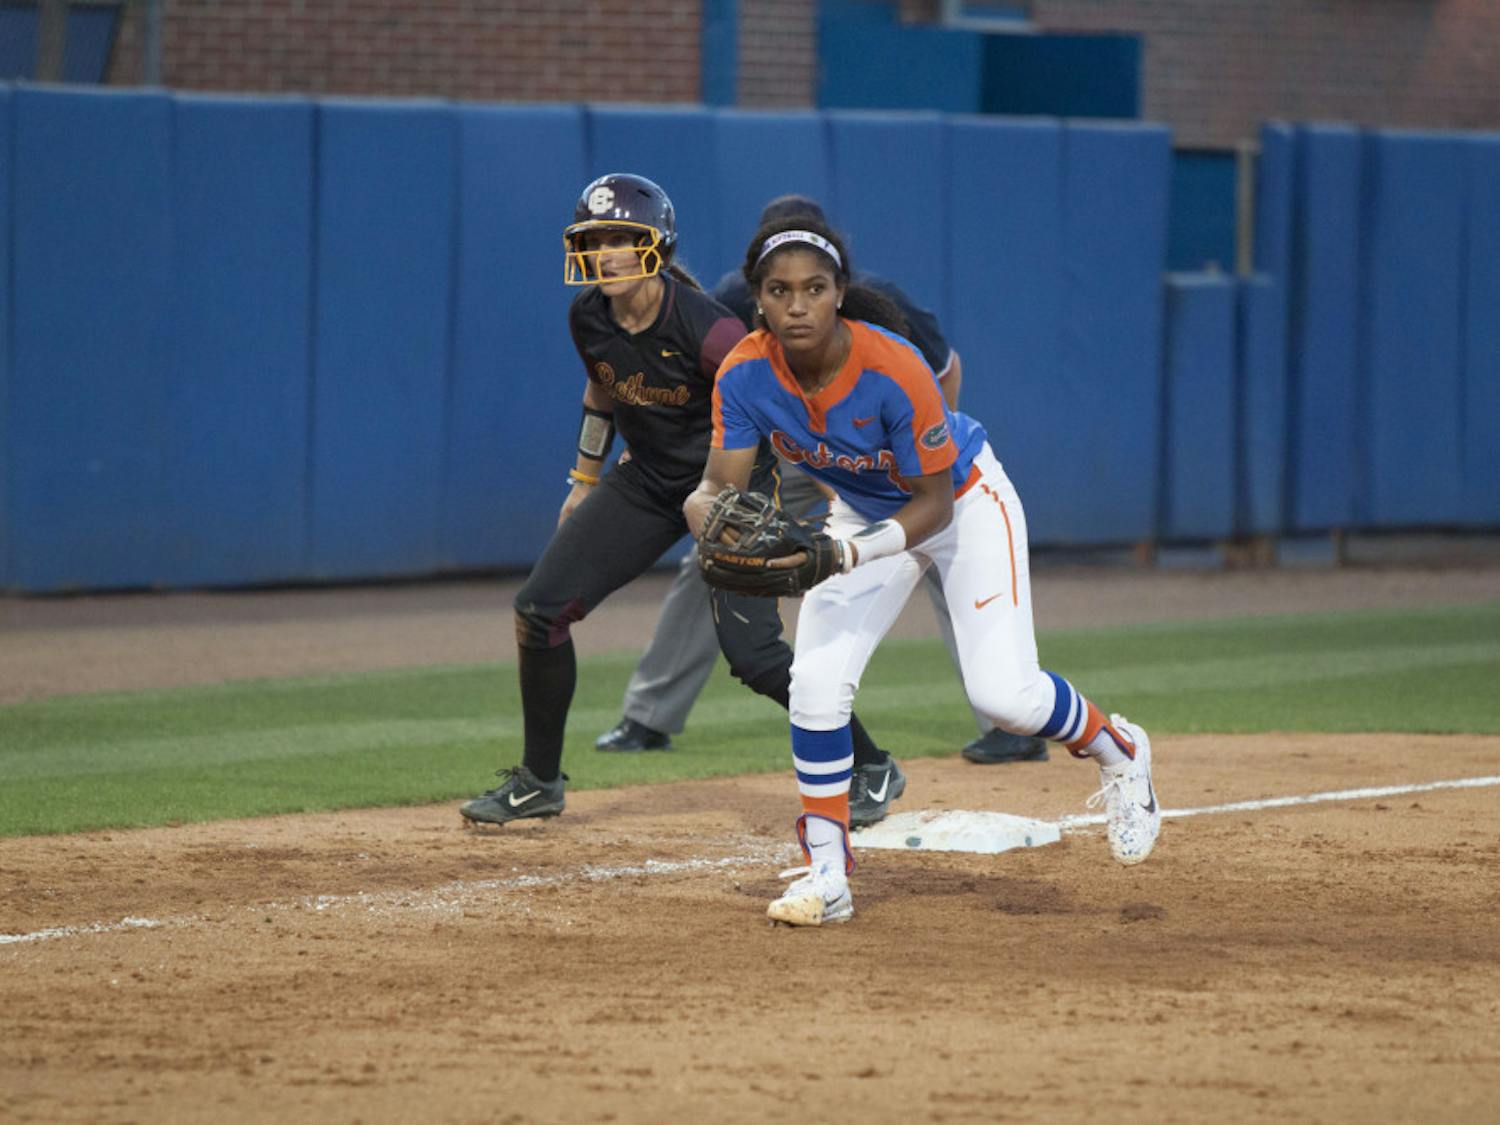 Aleshia Ocasio crouches on defense during Florida's 15-7 win over Bethune-Cookman on March 29, 2017, at Katie Seashole Pressly Stadium.